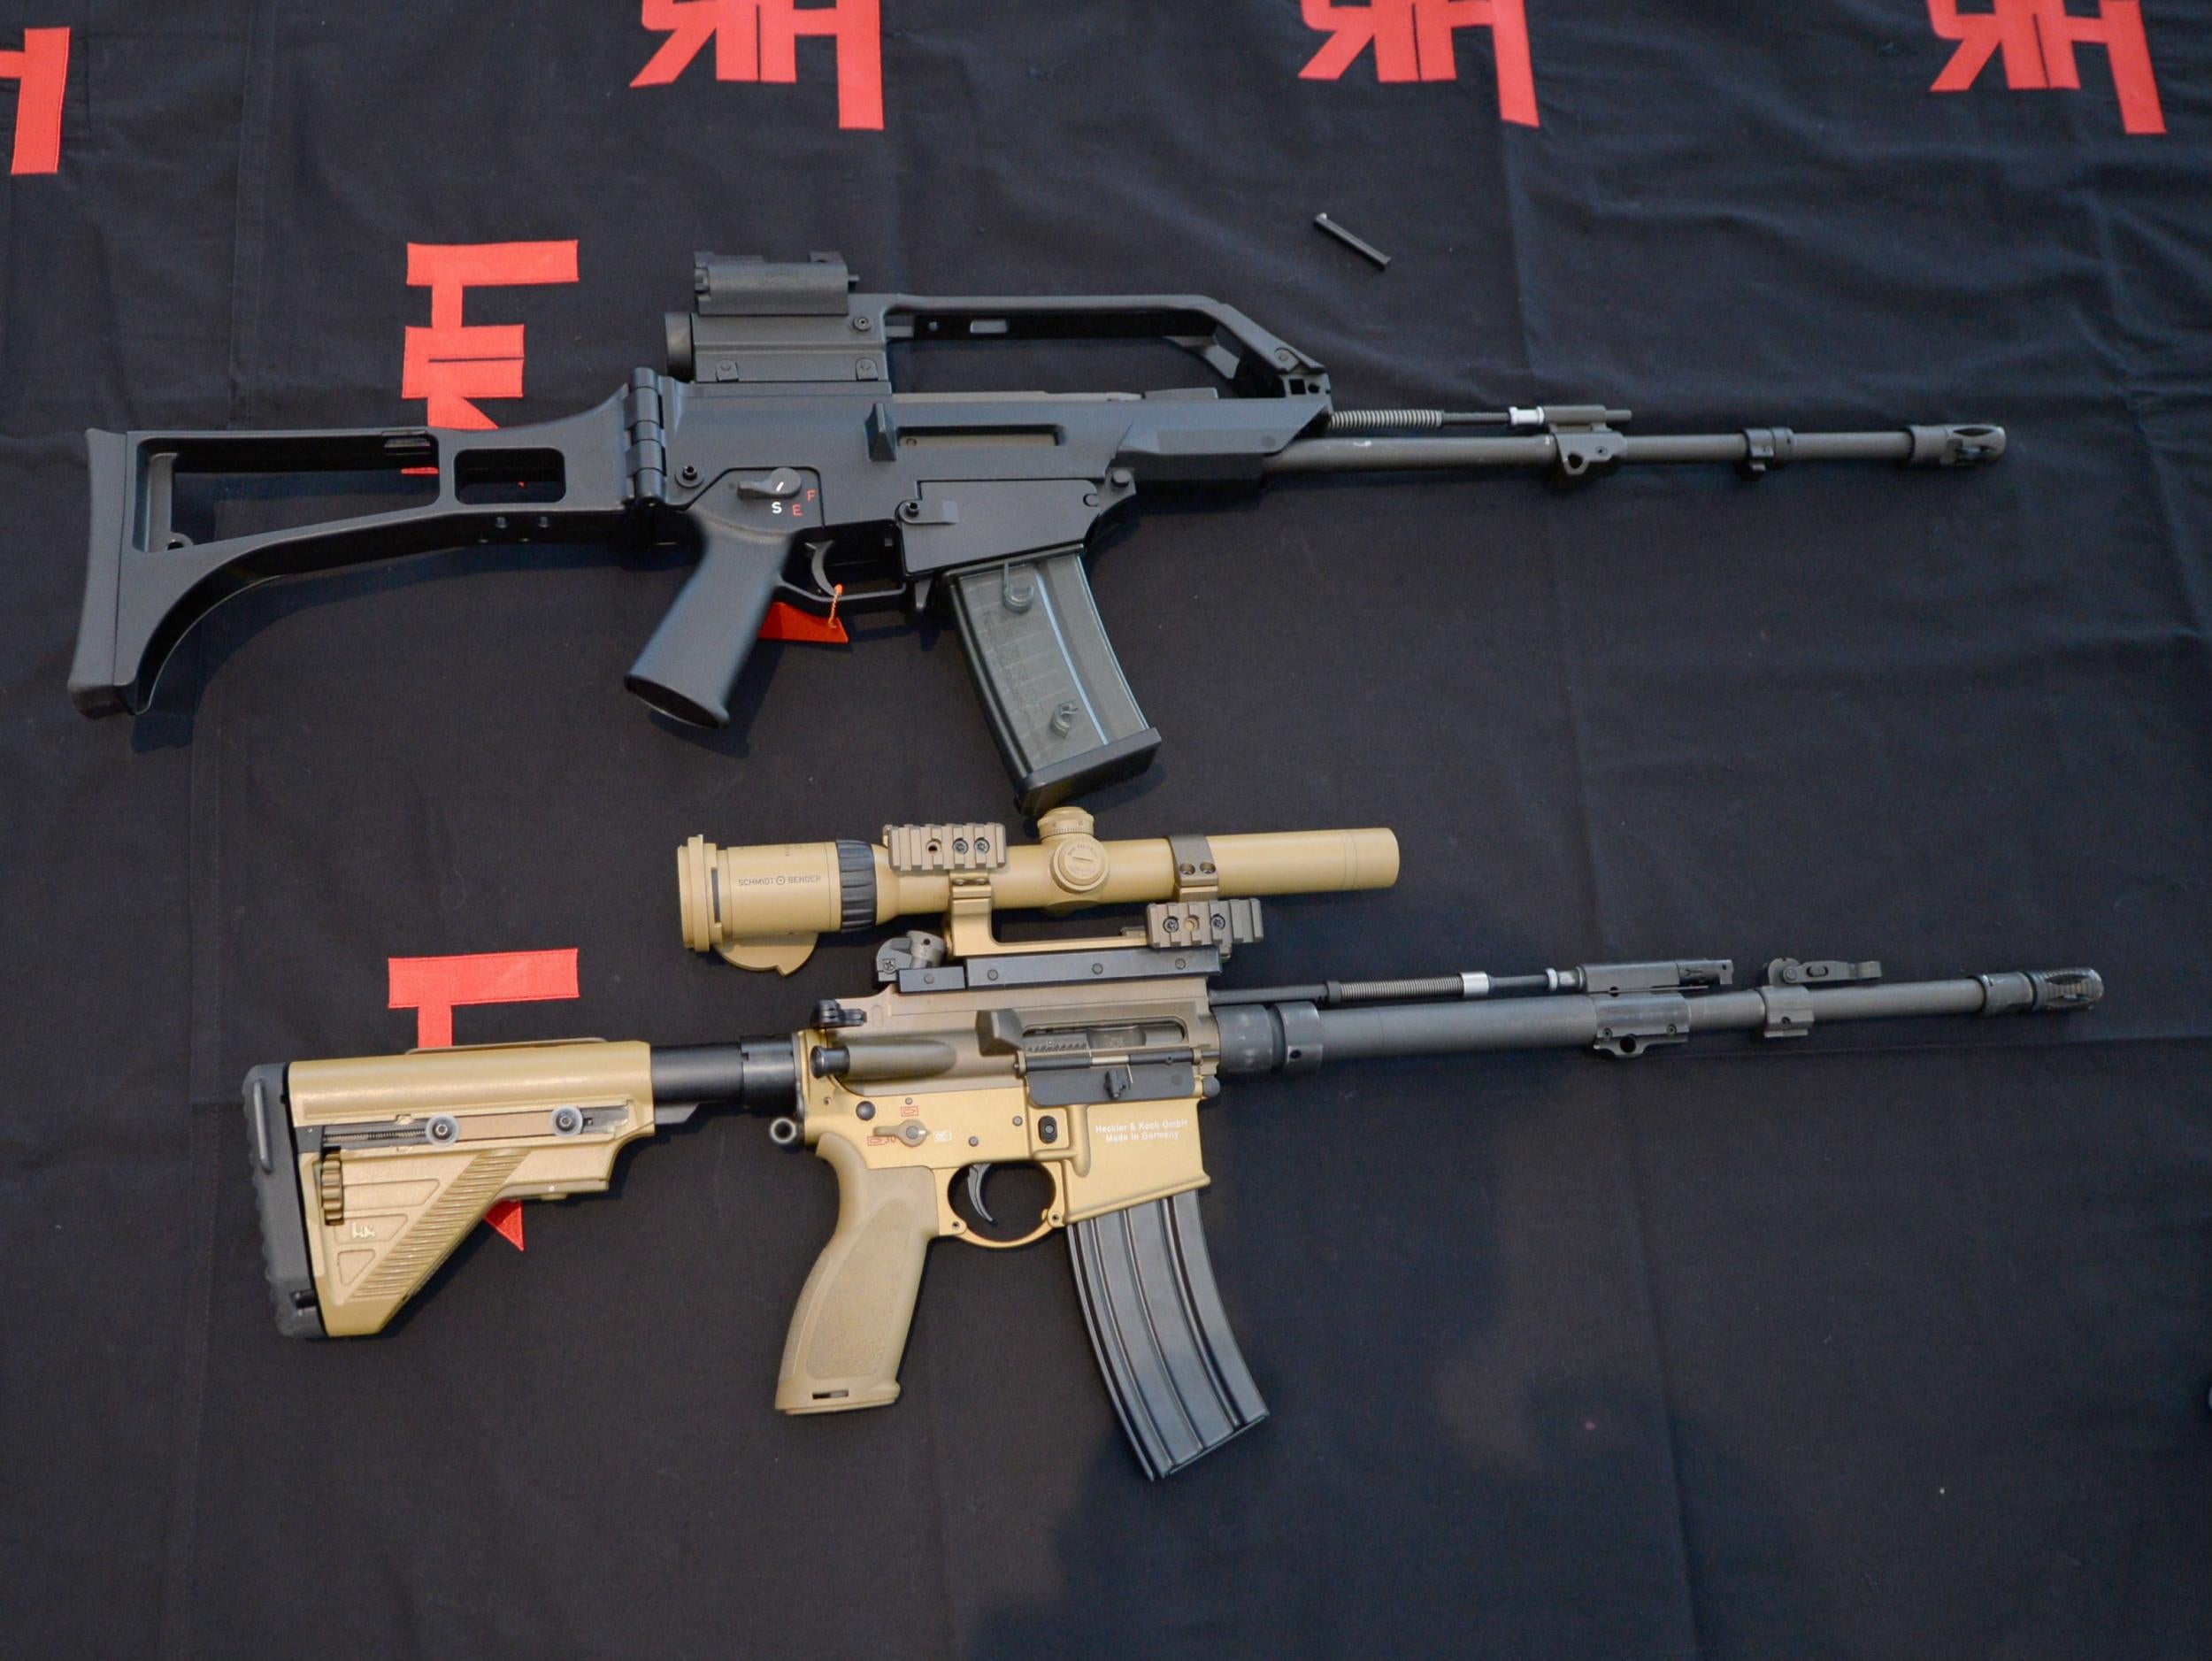 A G36 assault rifle (top) and a HK417-BW battle rifle made by German arms manufacturers Heckler & Koch